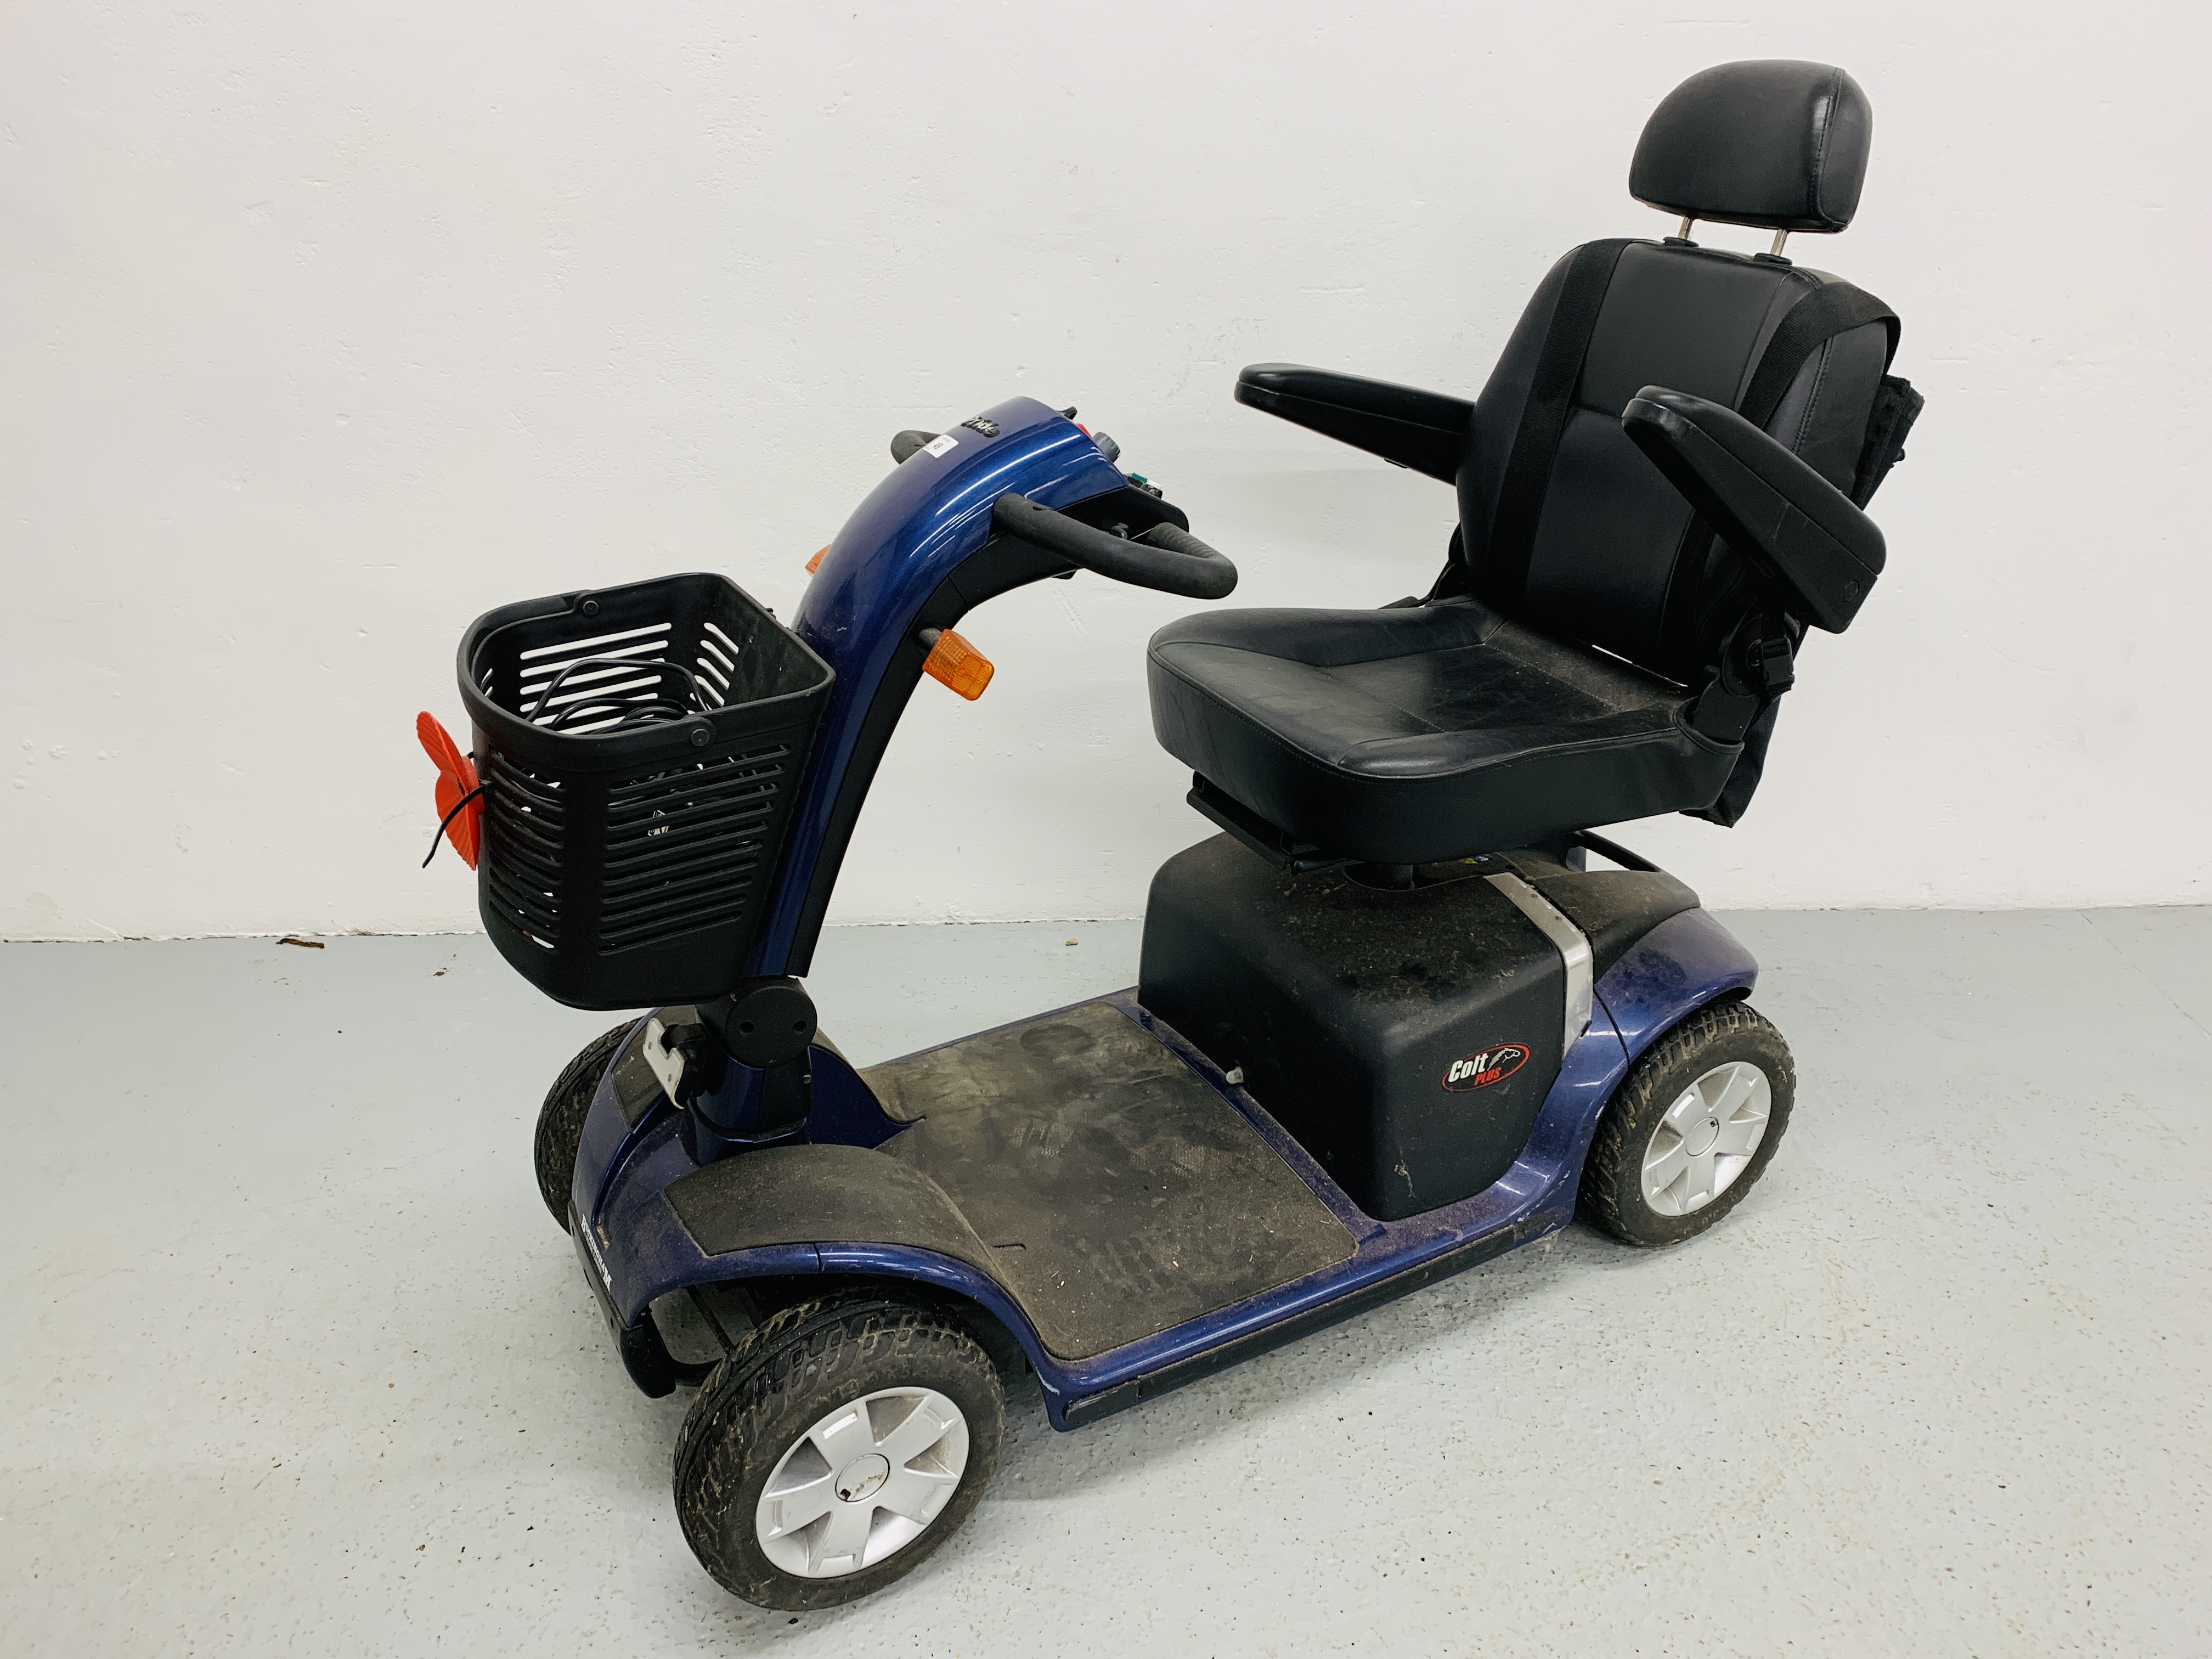 PRIDE COLT PLUS MOBILITY SCOOTER WITH CHARGER - SOLD AS SEEN